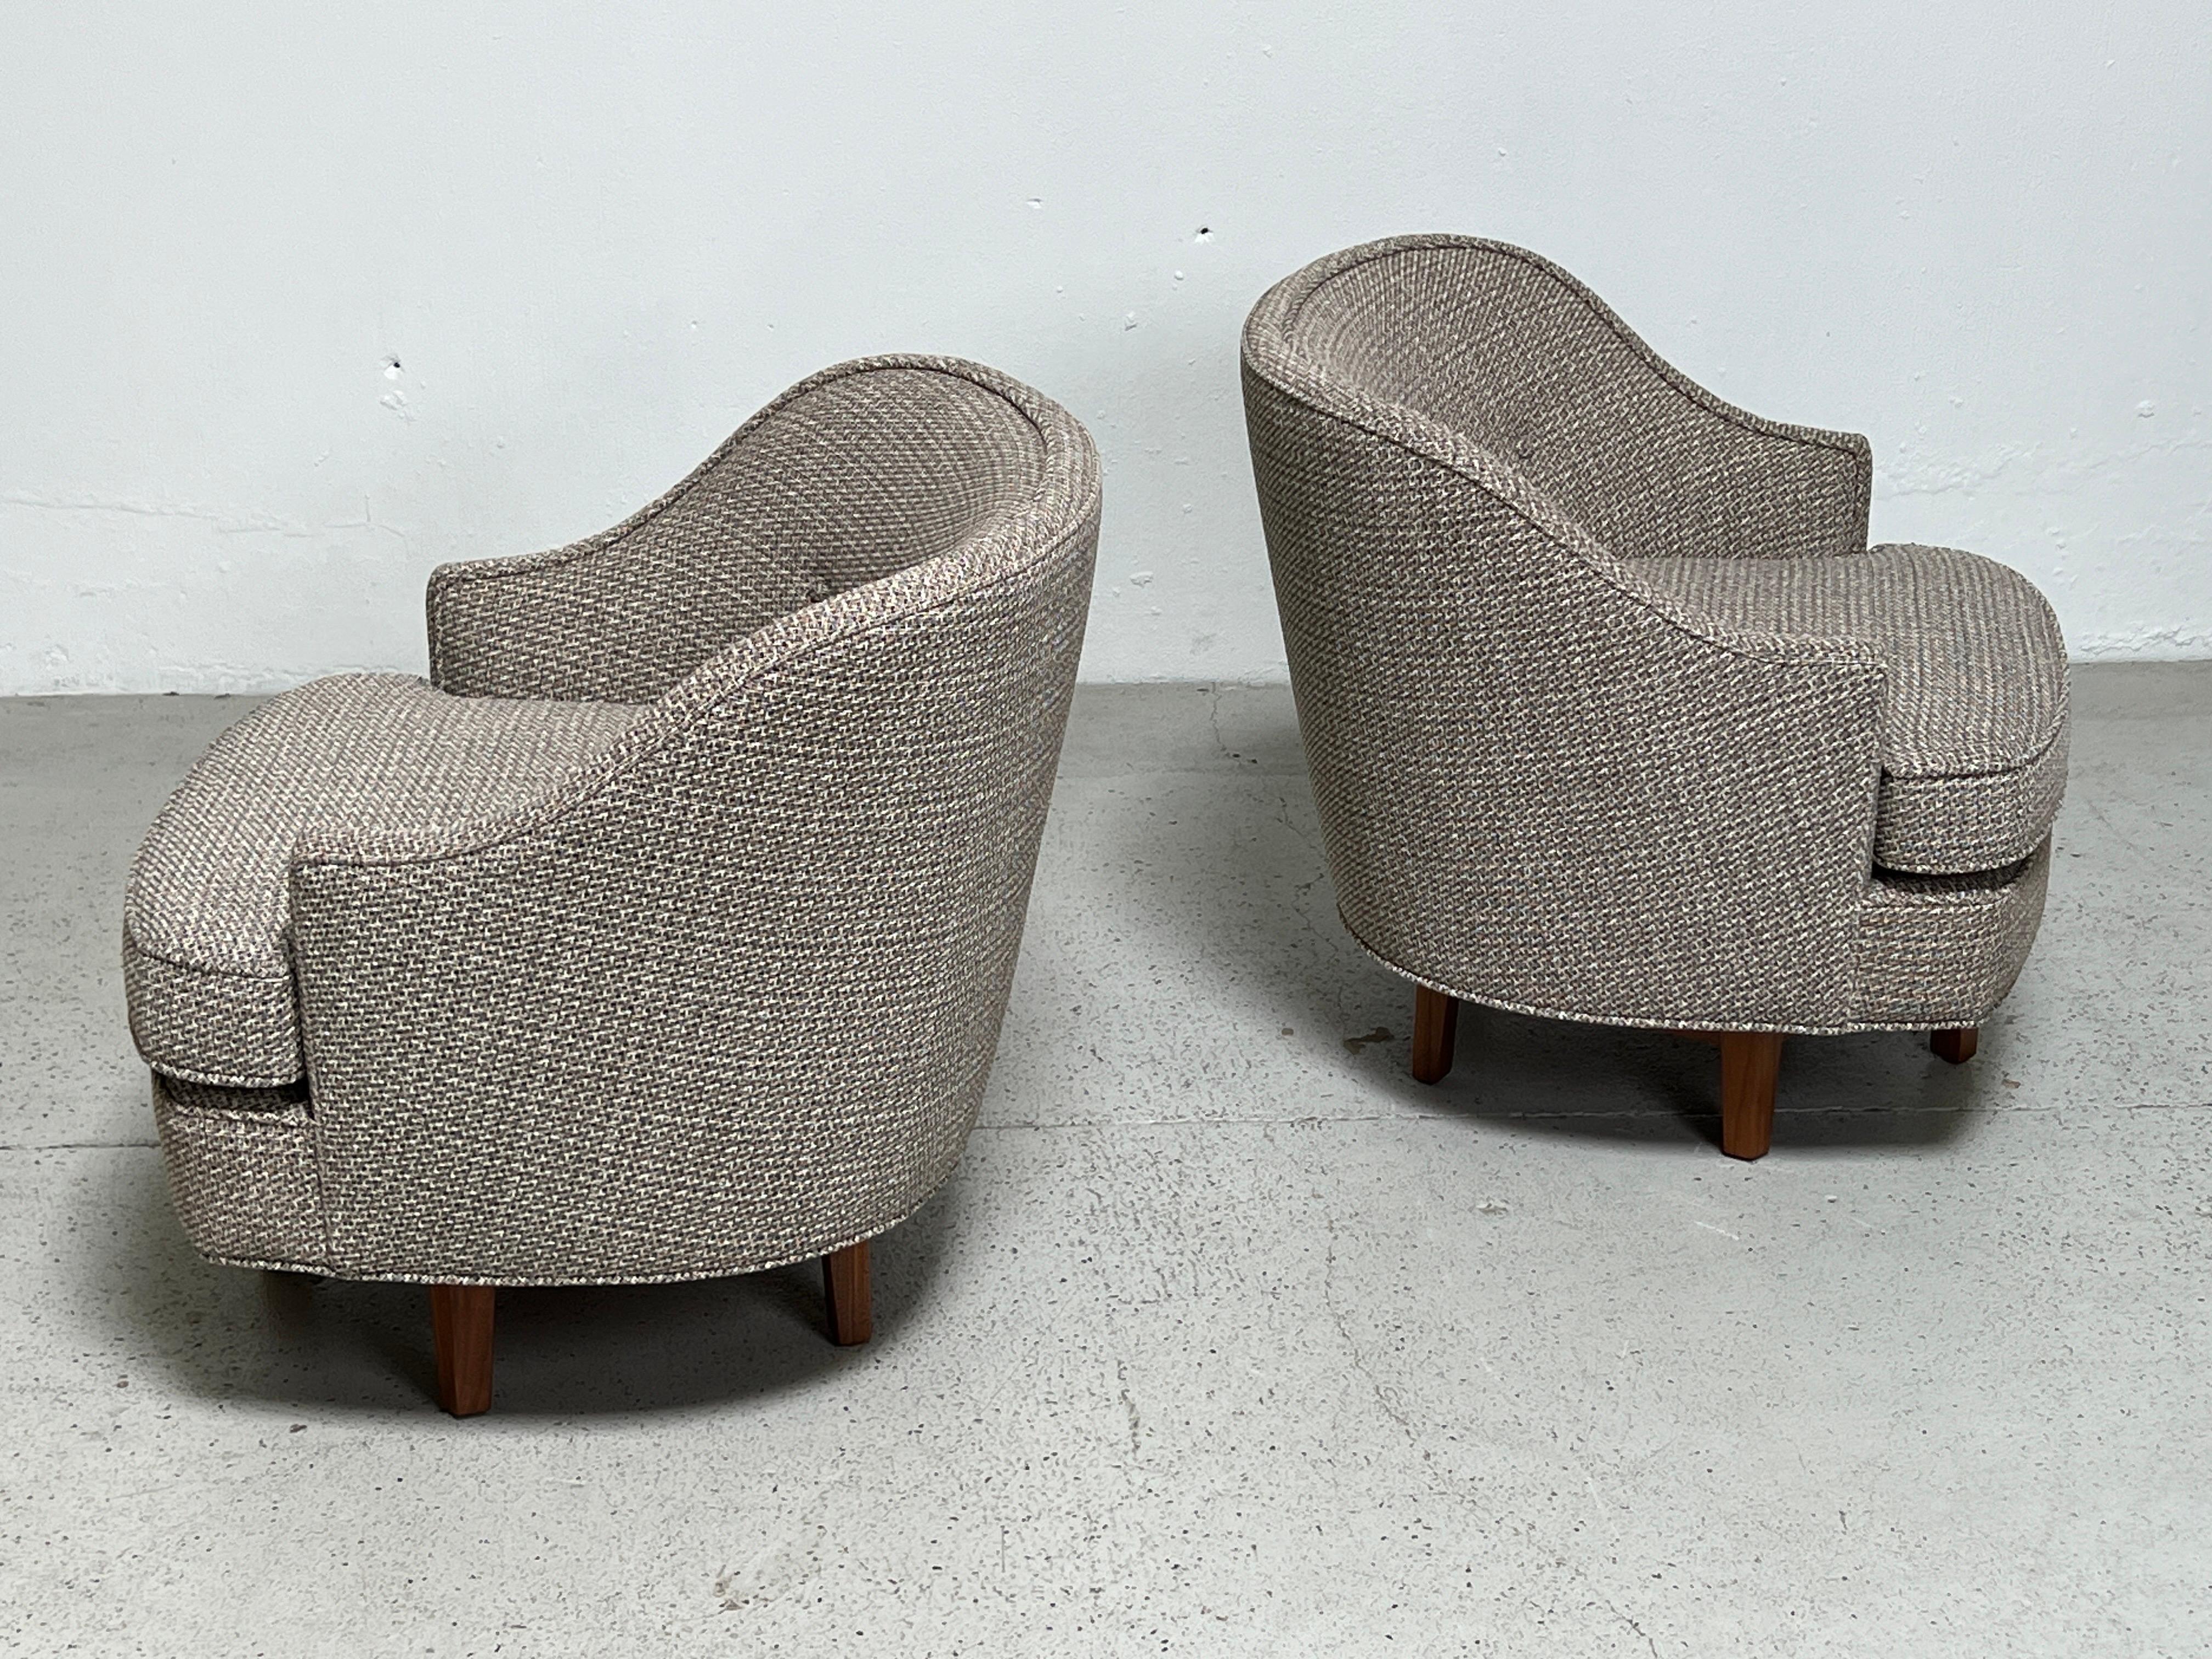 Pair of Swivels Chairs by Edward Wormley for Dunbar 1